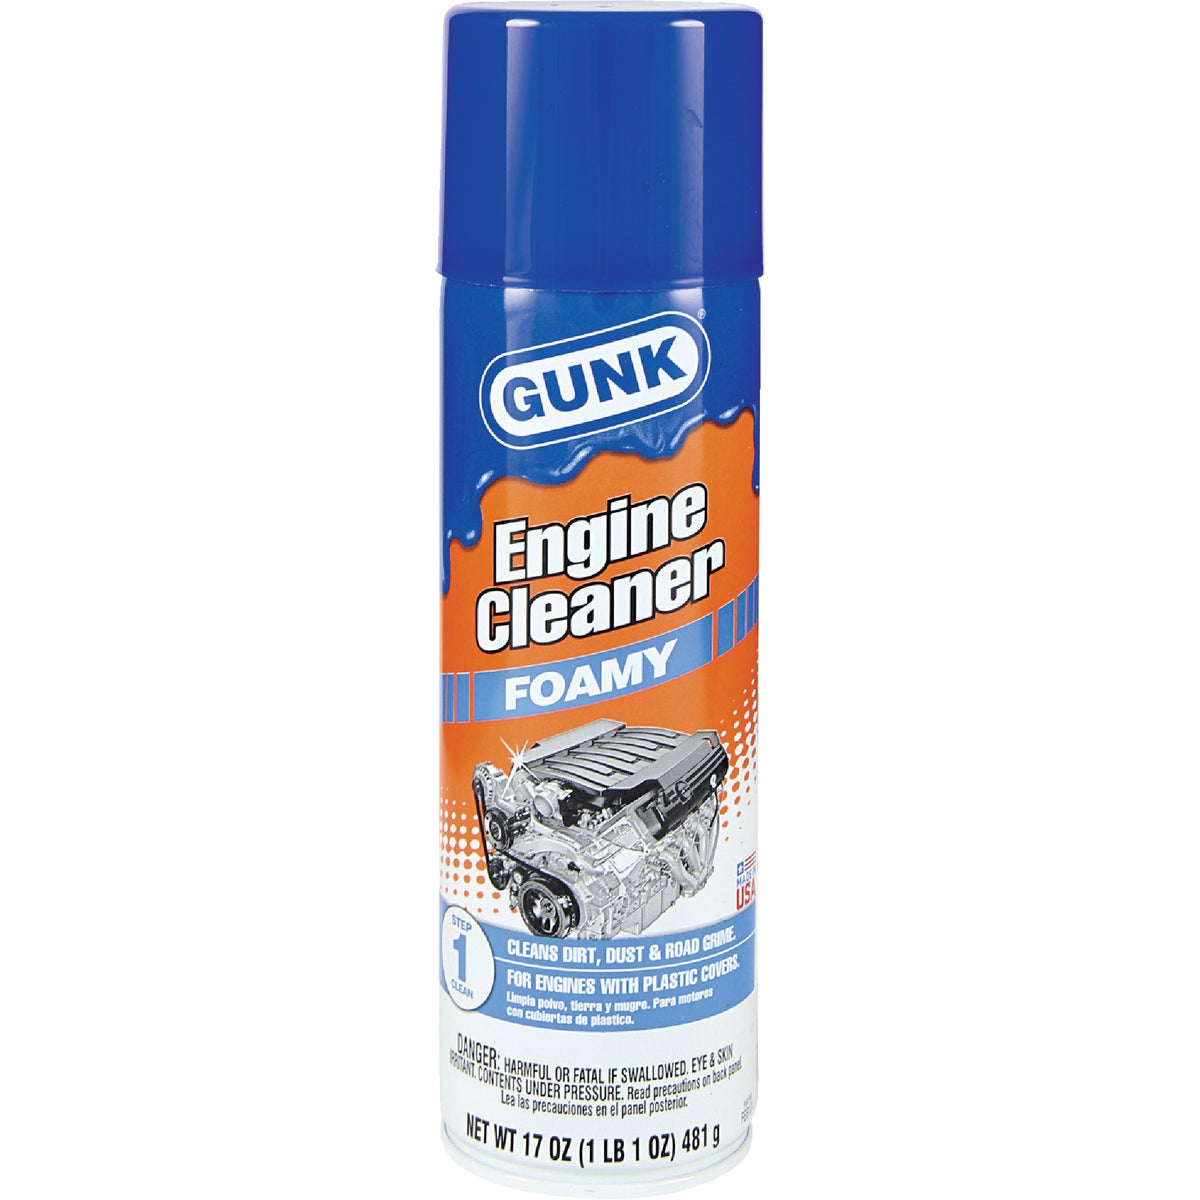 Item 584004, Foaming formula cleans dirt, dust, and road grime from newer high-heat 